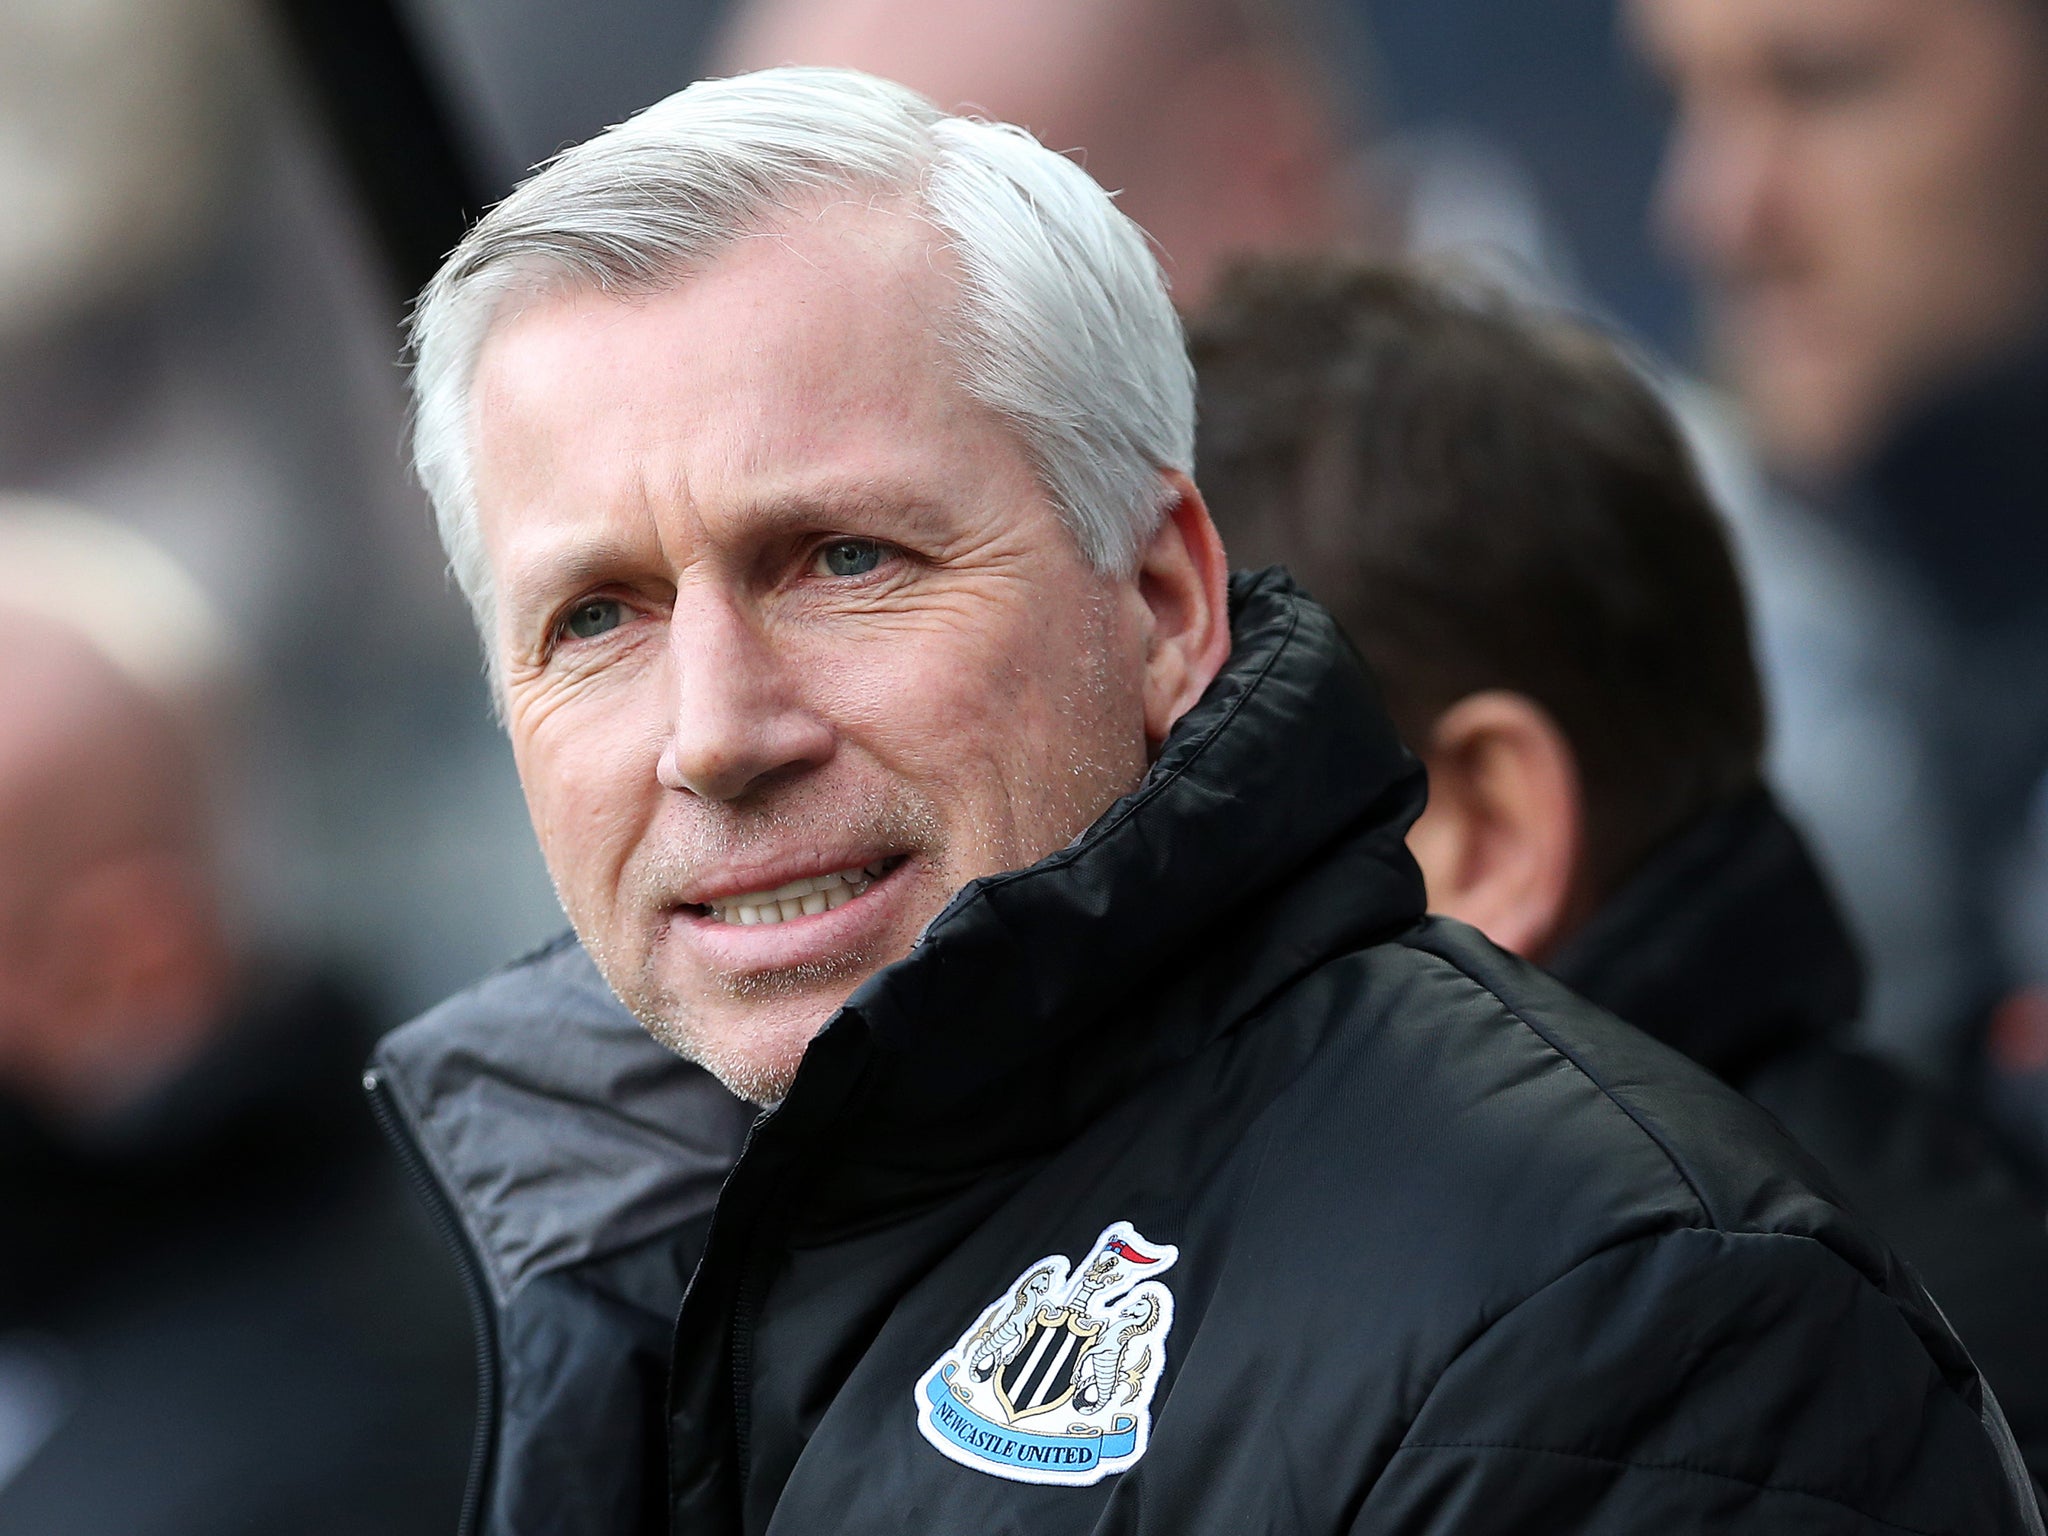 Alan Pardew has vowed to rebuild his Newcastle squad after the 3-0 defeat to Sunderland